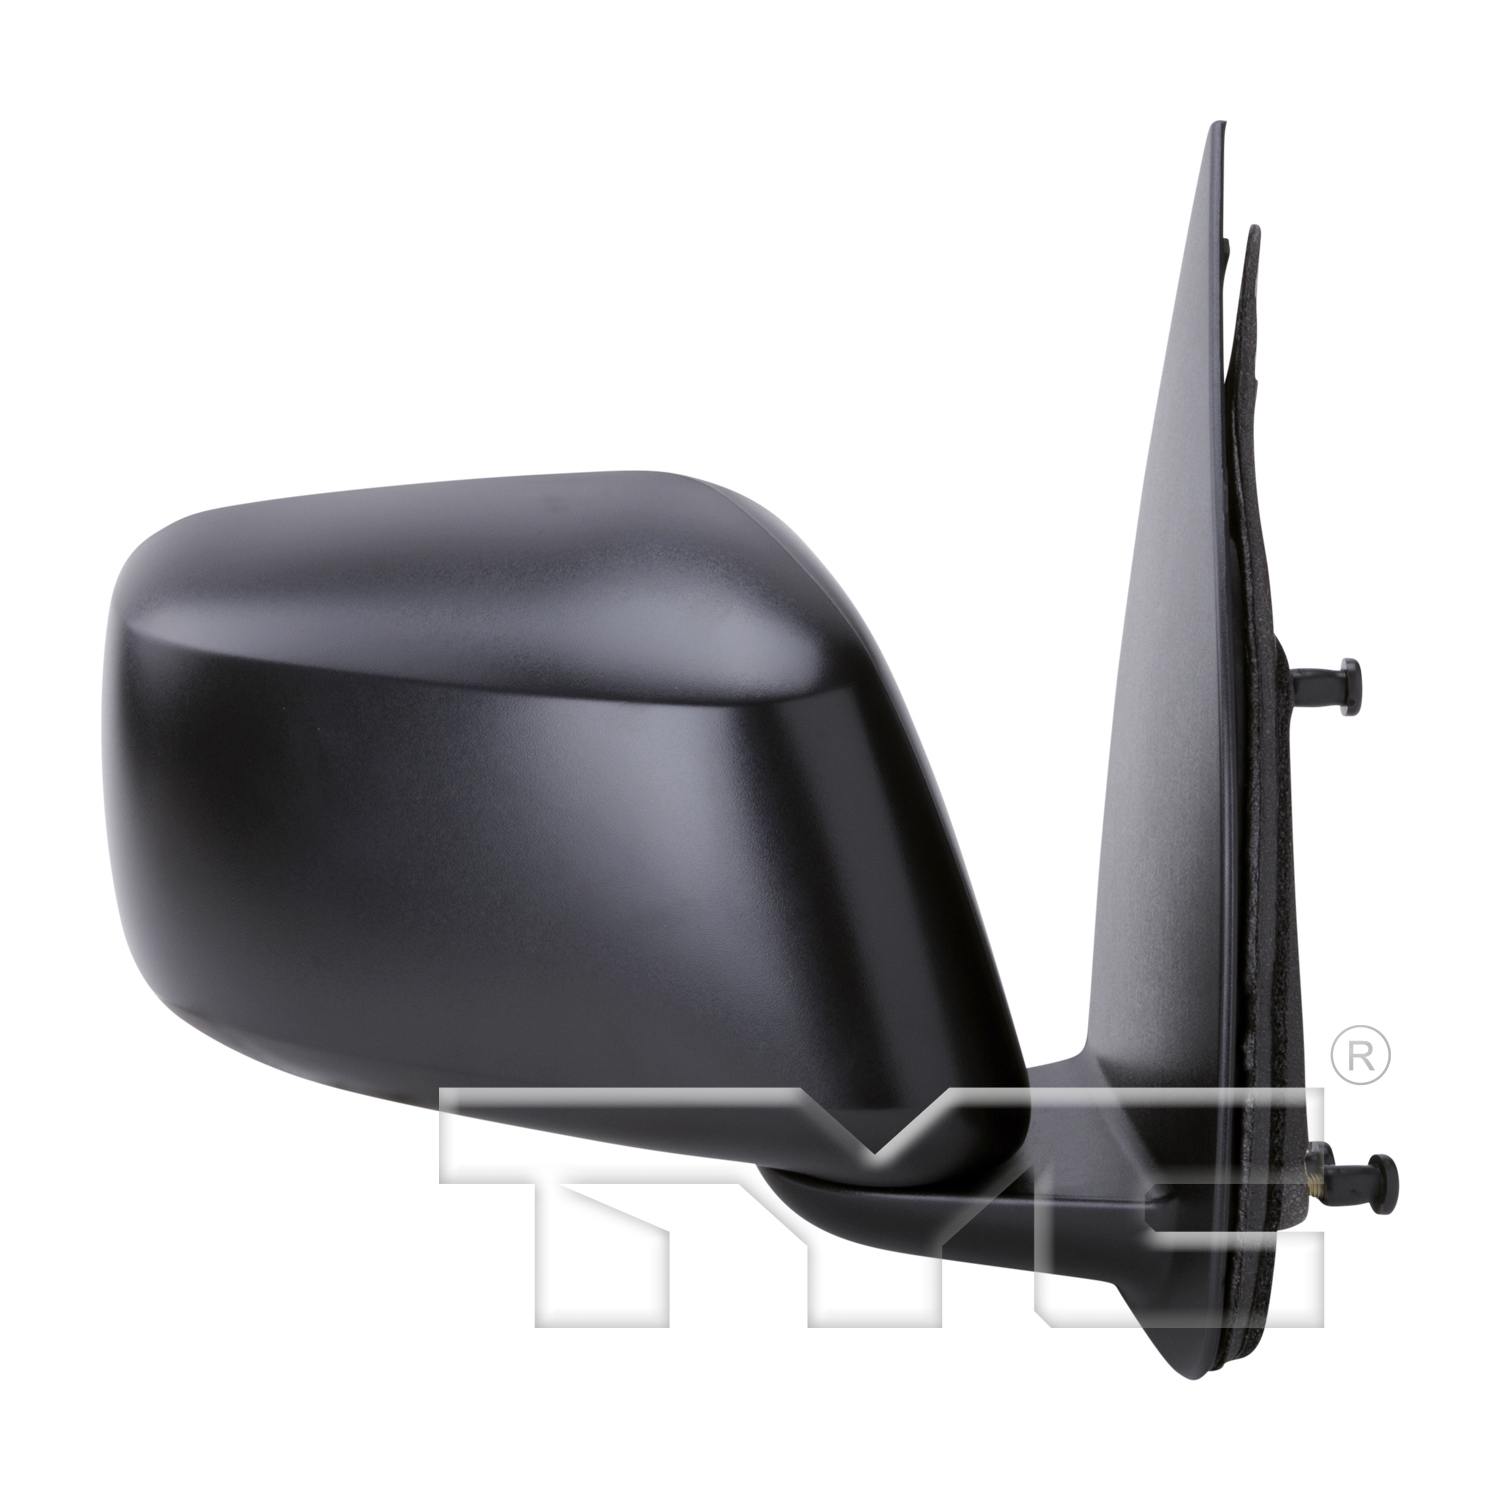 Aftermarket MIRRORS for NISSAN - FRONTIER, FRONTIER,05-15,RT Mirror outside rear view